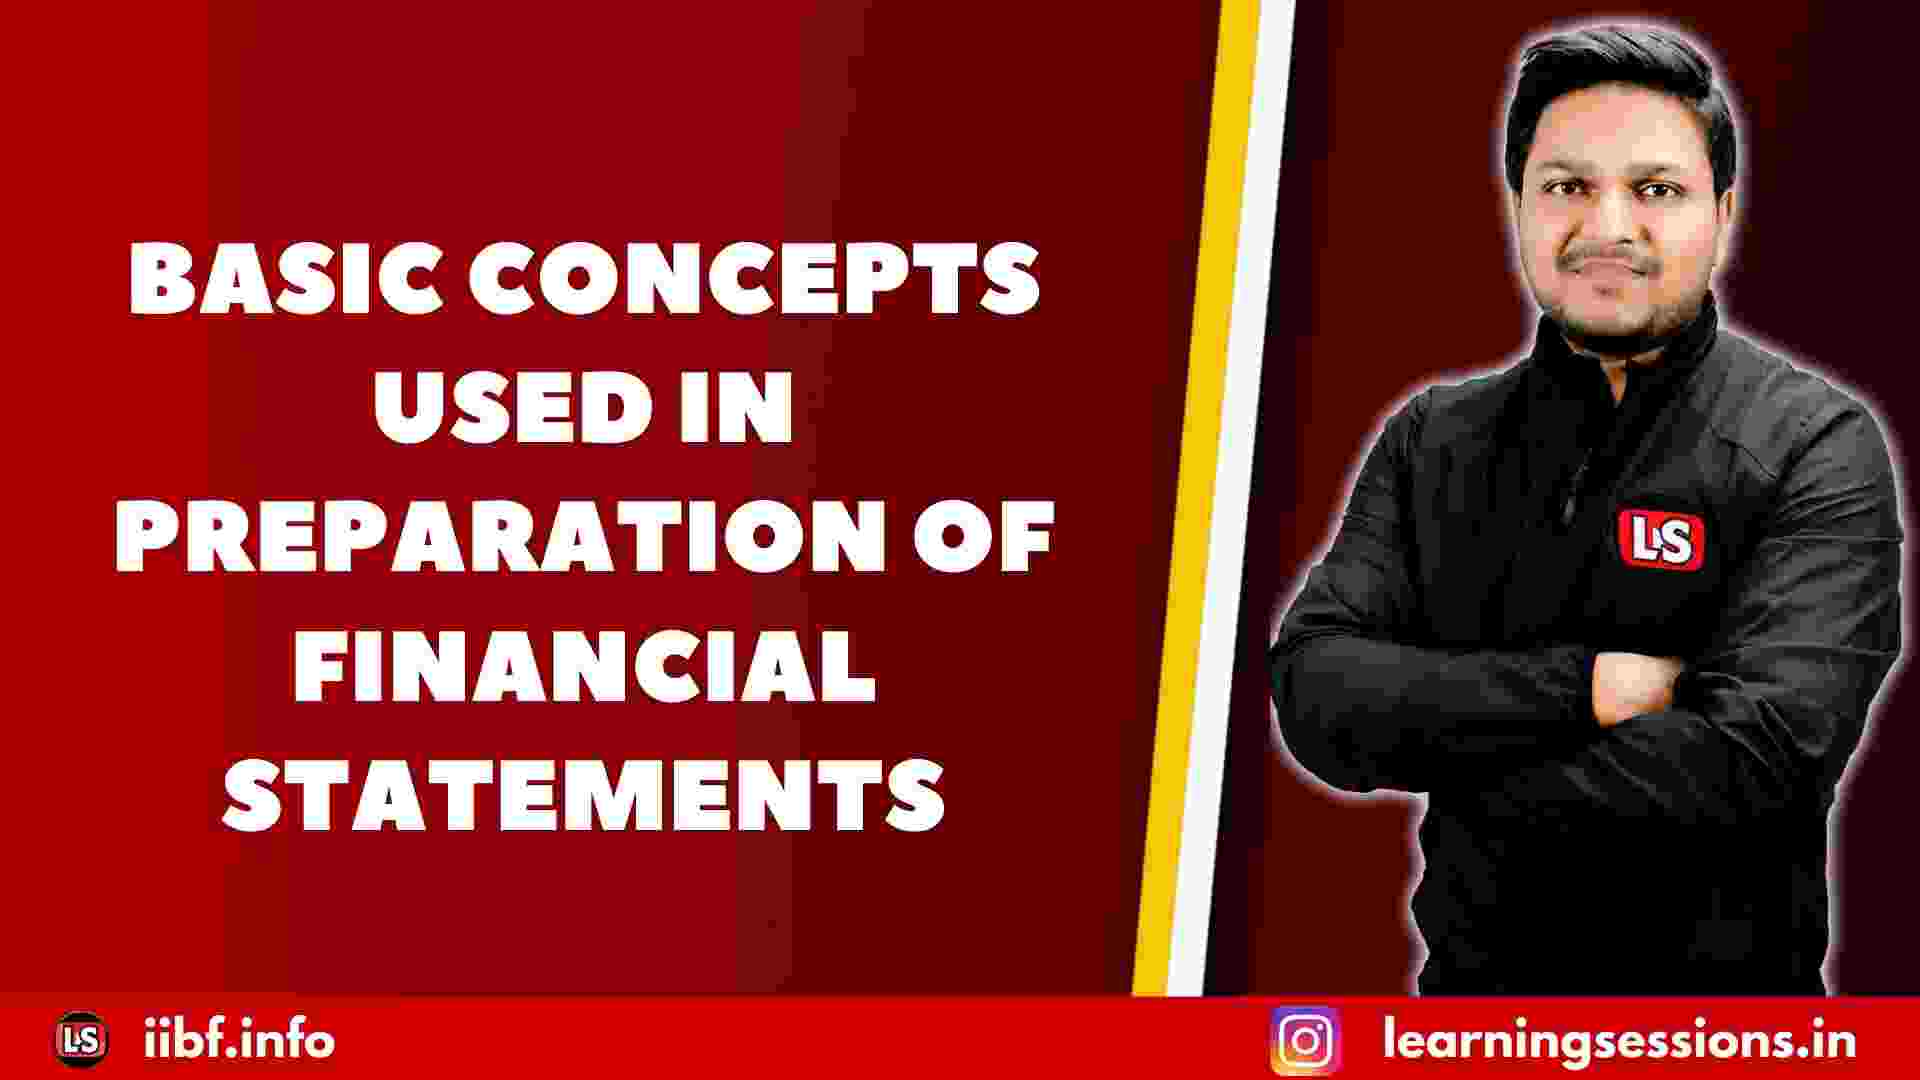 BASIC CONCEPTS USED IN PREPARATION OF FINANCIAL STATEMENTS